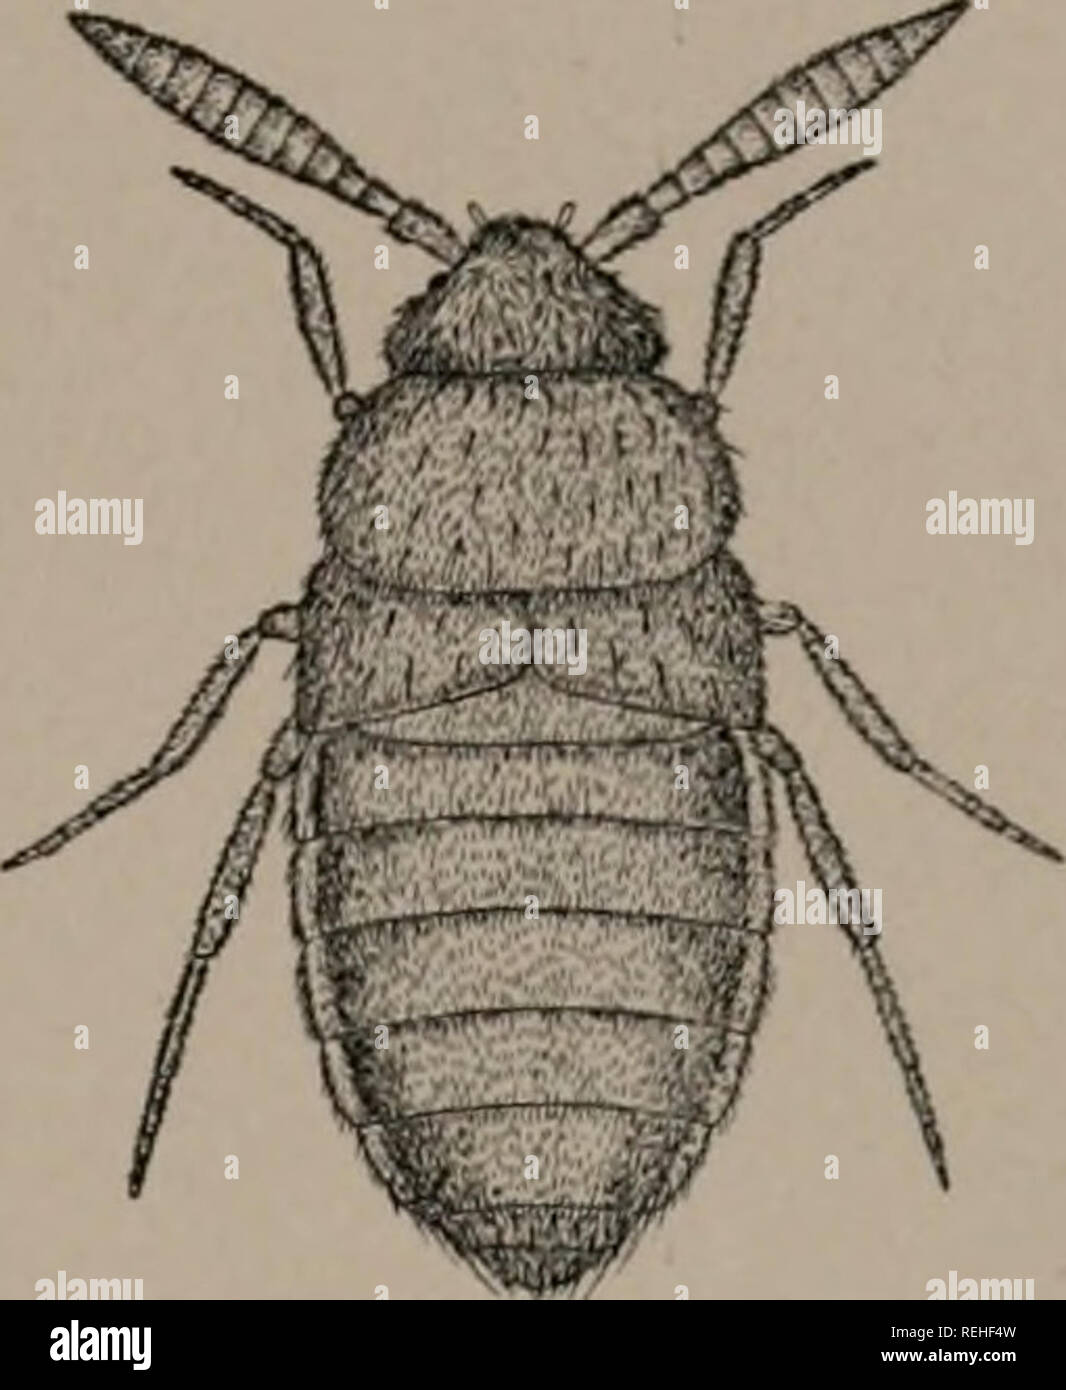 . Collected papers on ants. Ants. I90S-] Wheeler, Ants of the Genus Liometopum. 333. Fig. 3. Dinardilla liometofii Wasmann. Lomechusa, etc.&quot; These beetles are of more than usual interest because they are both tactual mimics, that is, they probably deceive the ants through a resemblance in form or surface texture to the Liometopum workers. While both beetles are highly pubescent, like these workers, they differ greatly in form; Apteronina being decidedly ant-like, whereas Dinardilla has the form of beetles which ants have considerable difficulty in seizing or holding in their mandibles. Ac Stock Photo